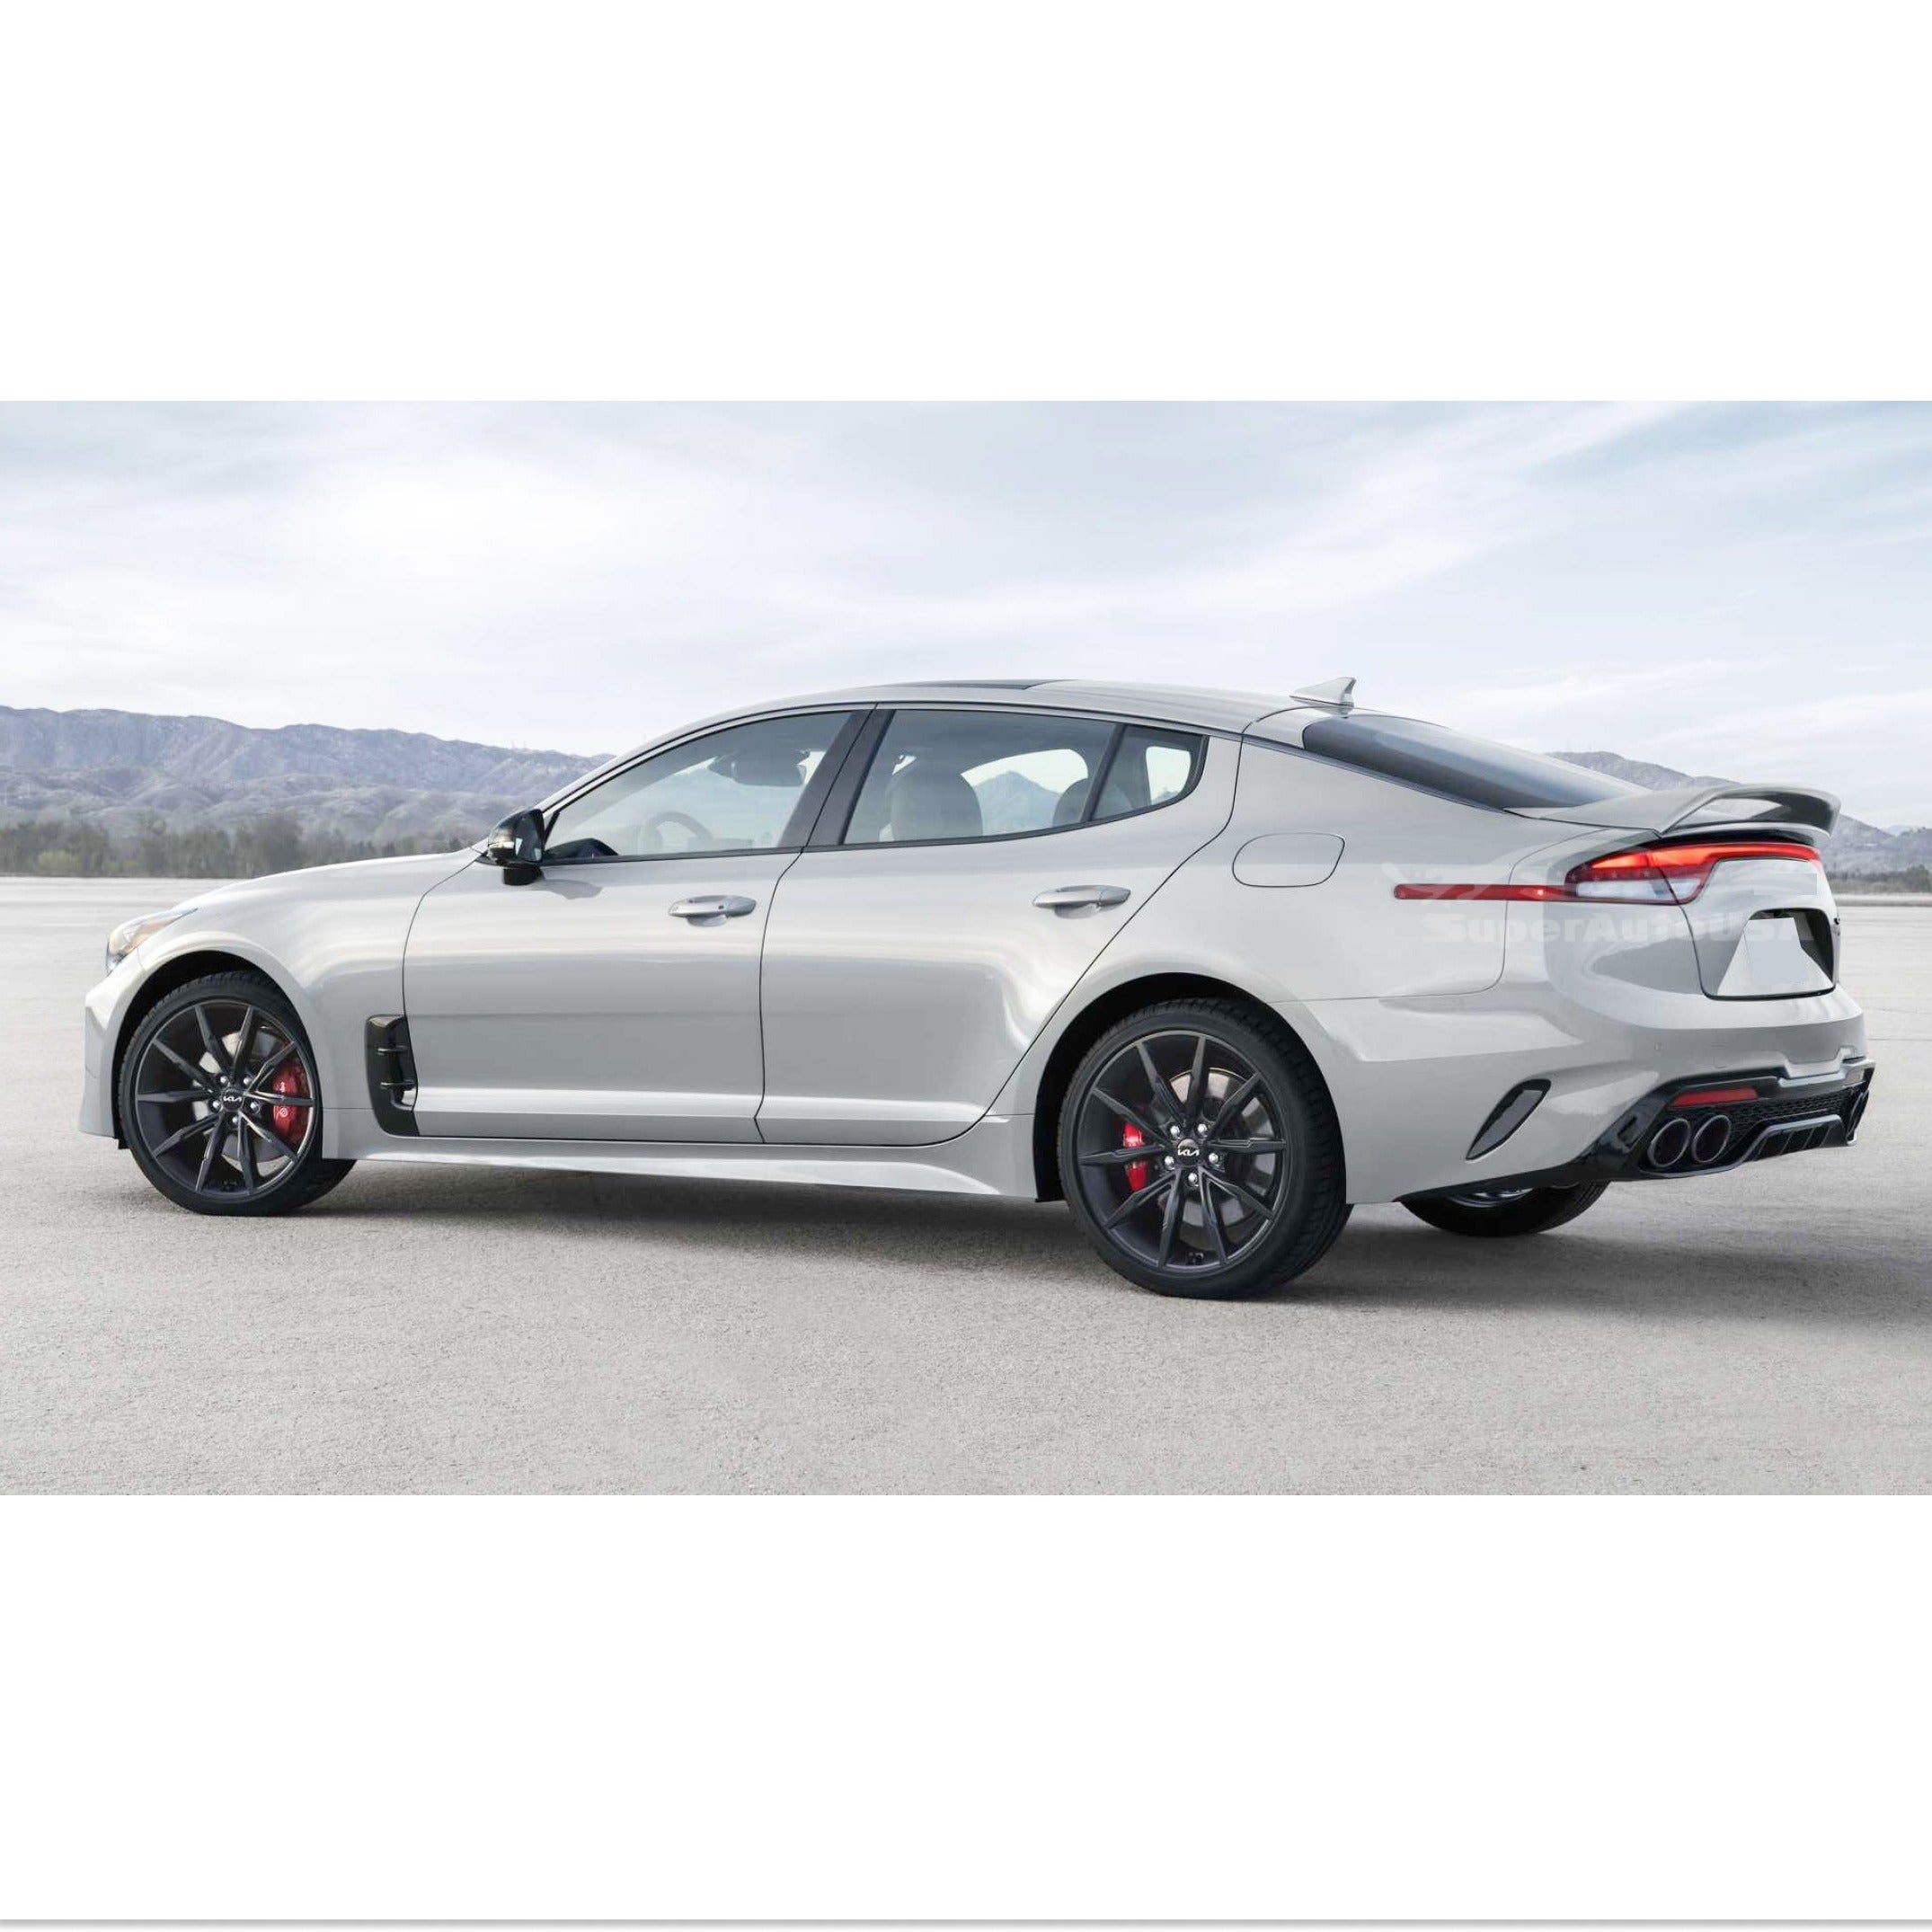 Dynamic angle showing the Kia Stinger with its Ceramic Silver Metallic Scorpion GT Style Rear Trunk Spoiler Wing, illustrating improved performance and style